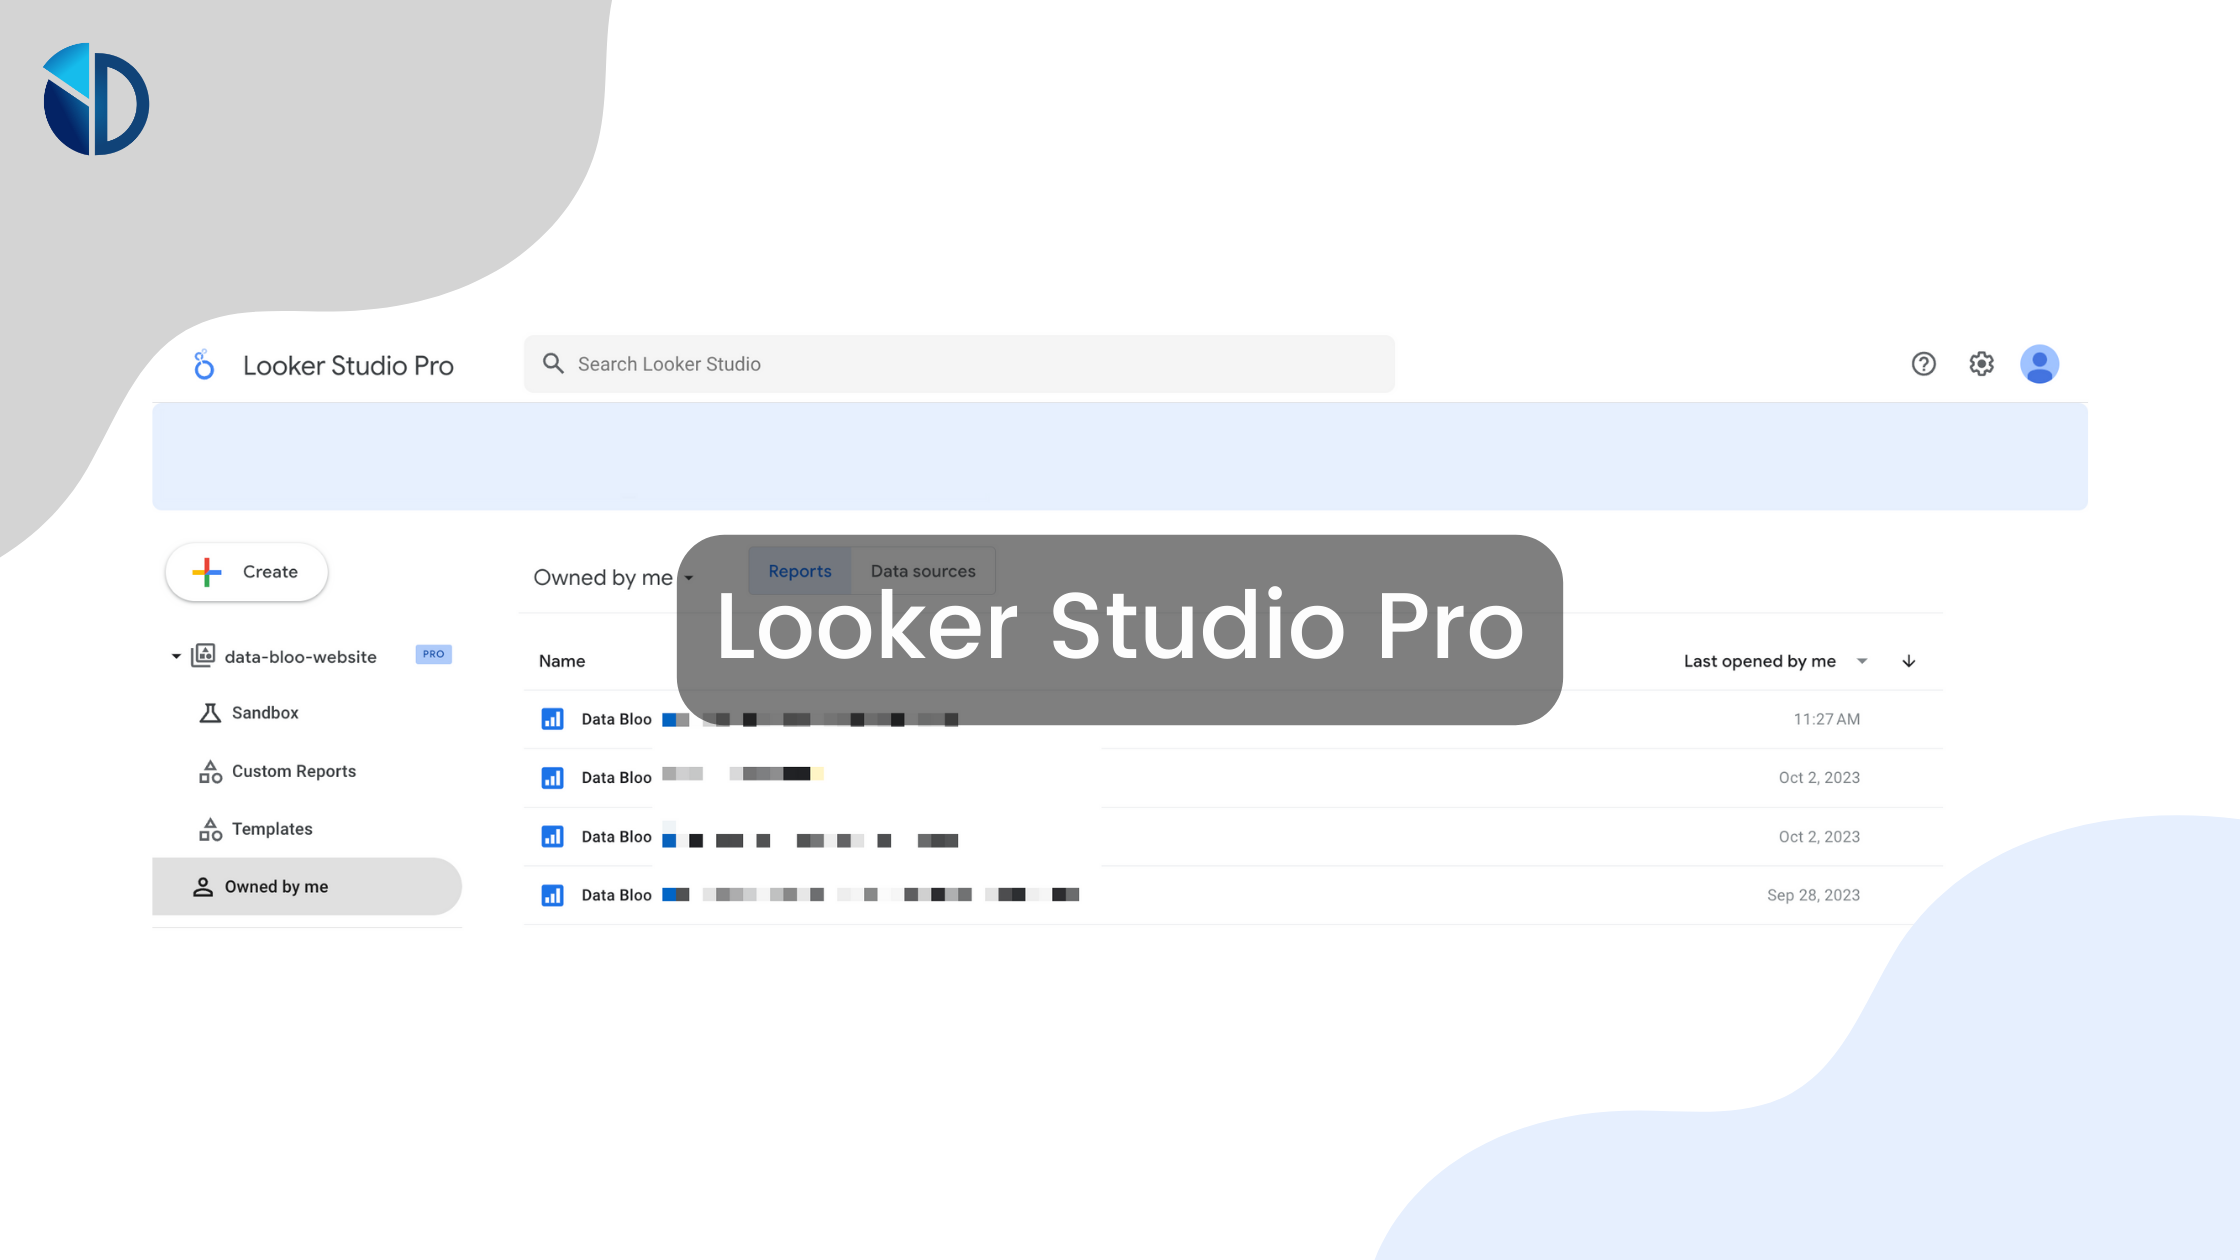 Your Guide to Google Looker Studio Pro - Data Bloo